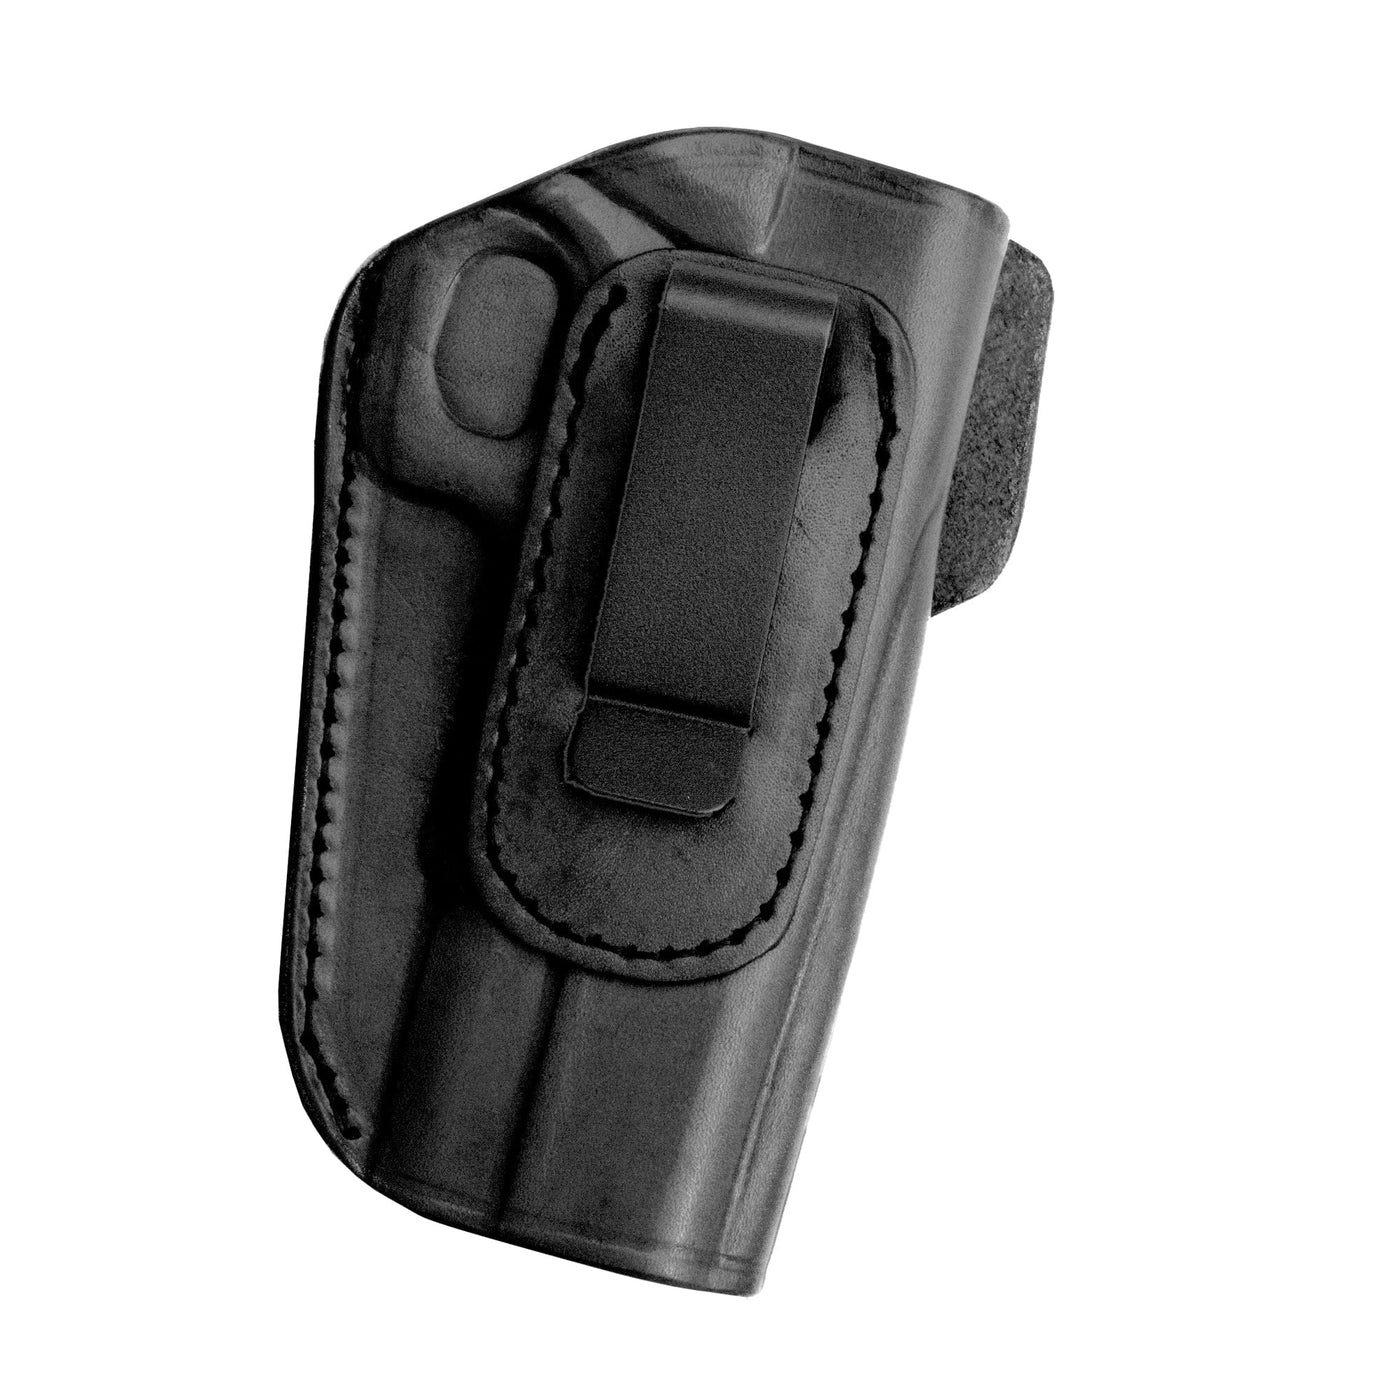 Tagua Tagua Iph 4-in-1 1911 5" Rh Blk Holsters